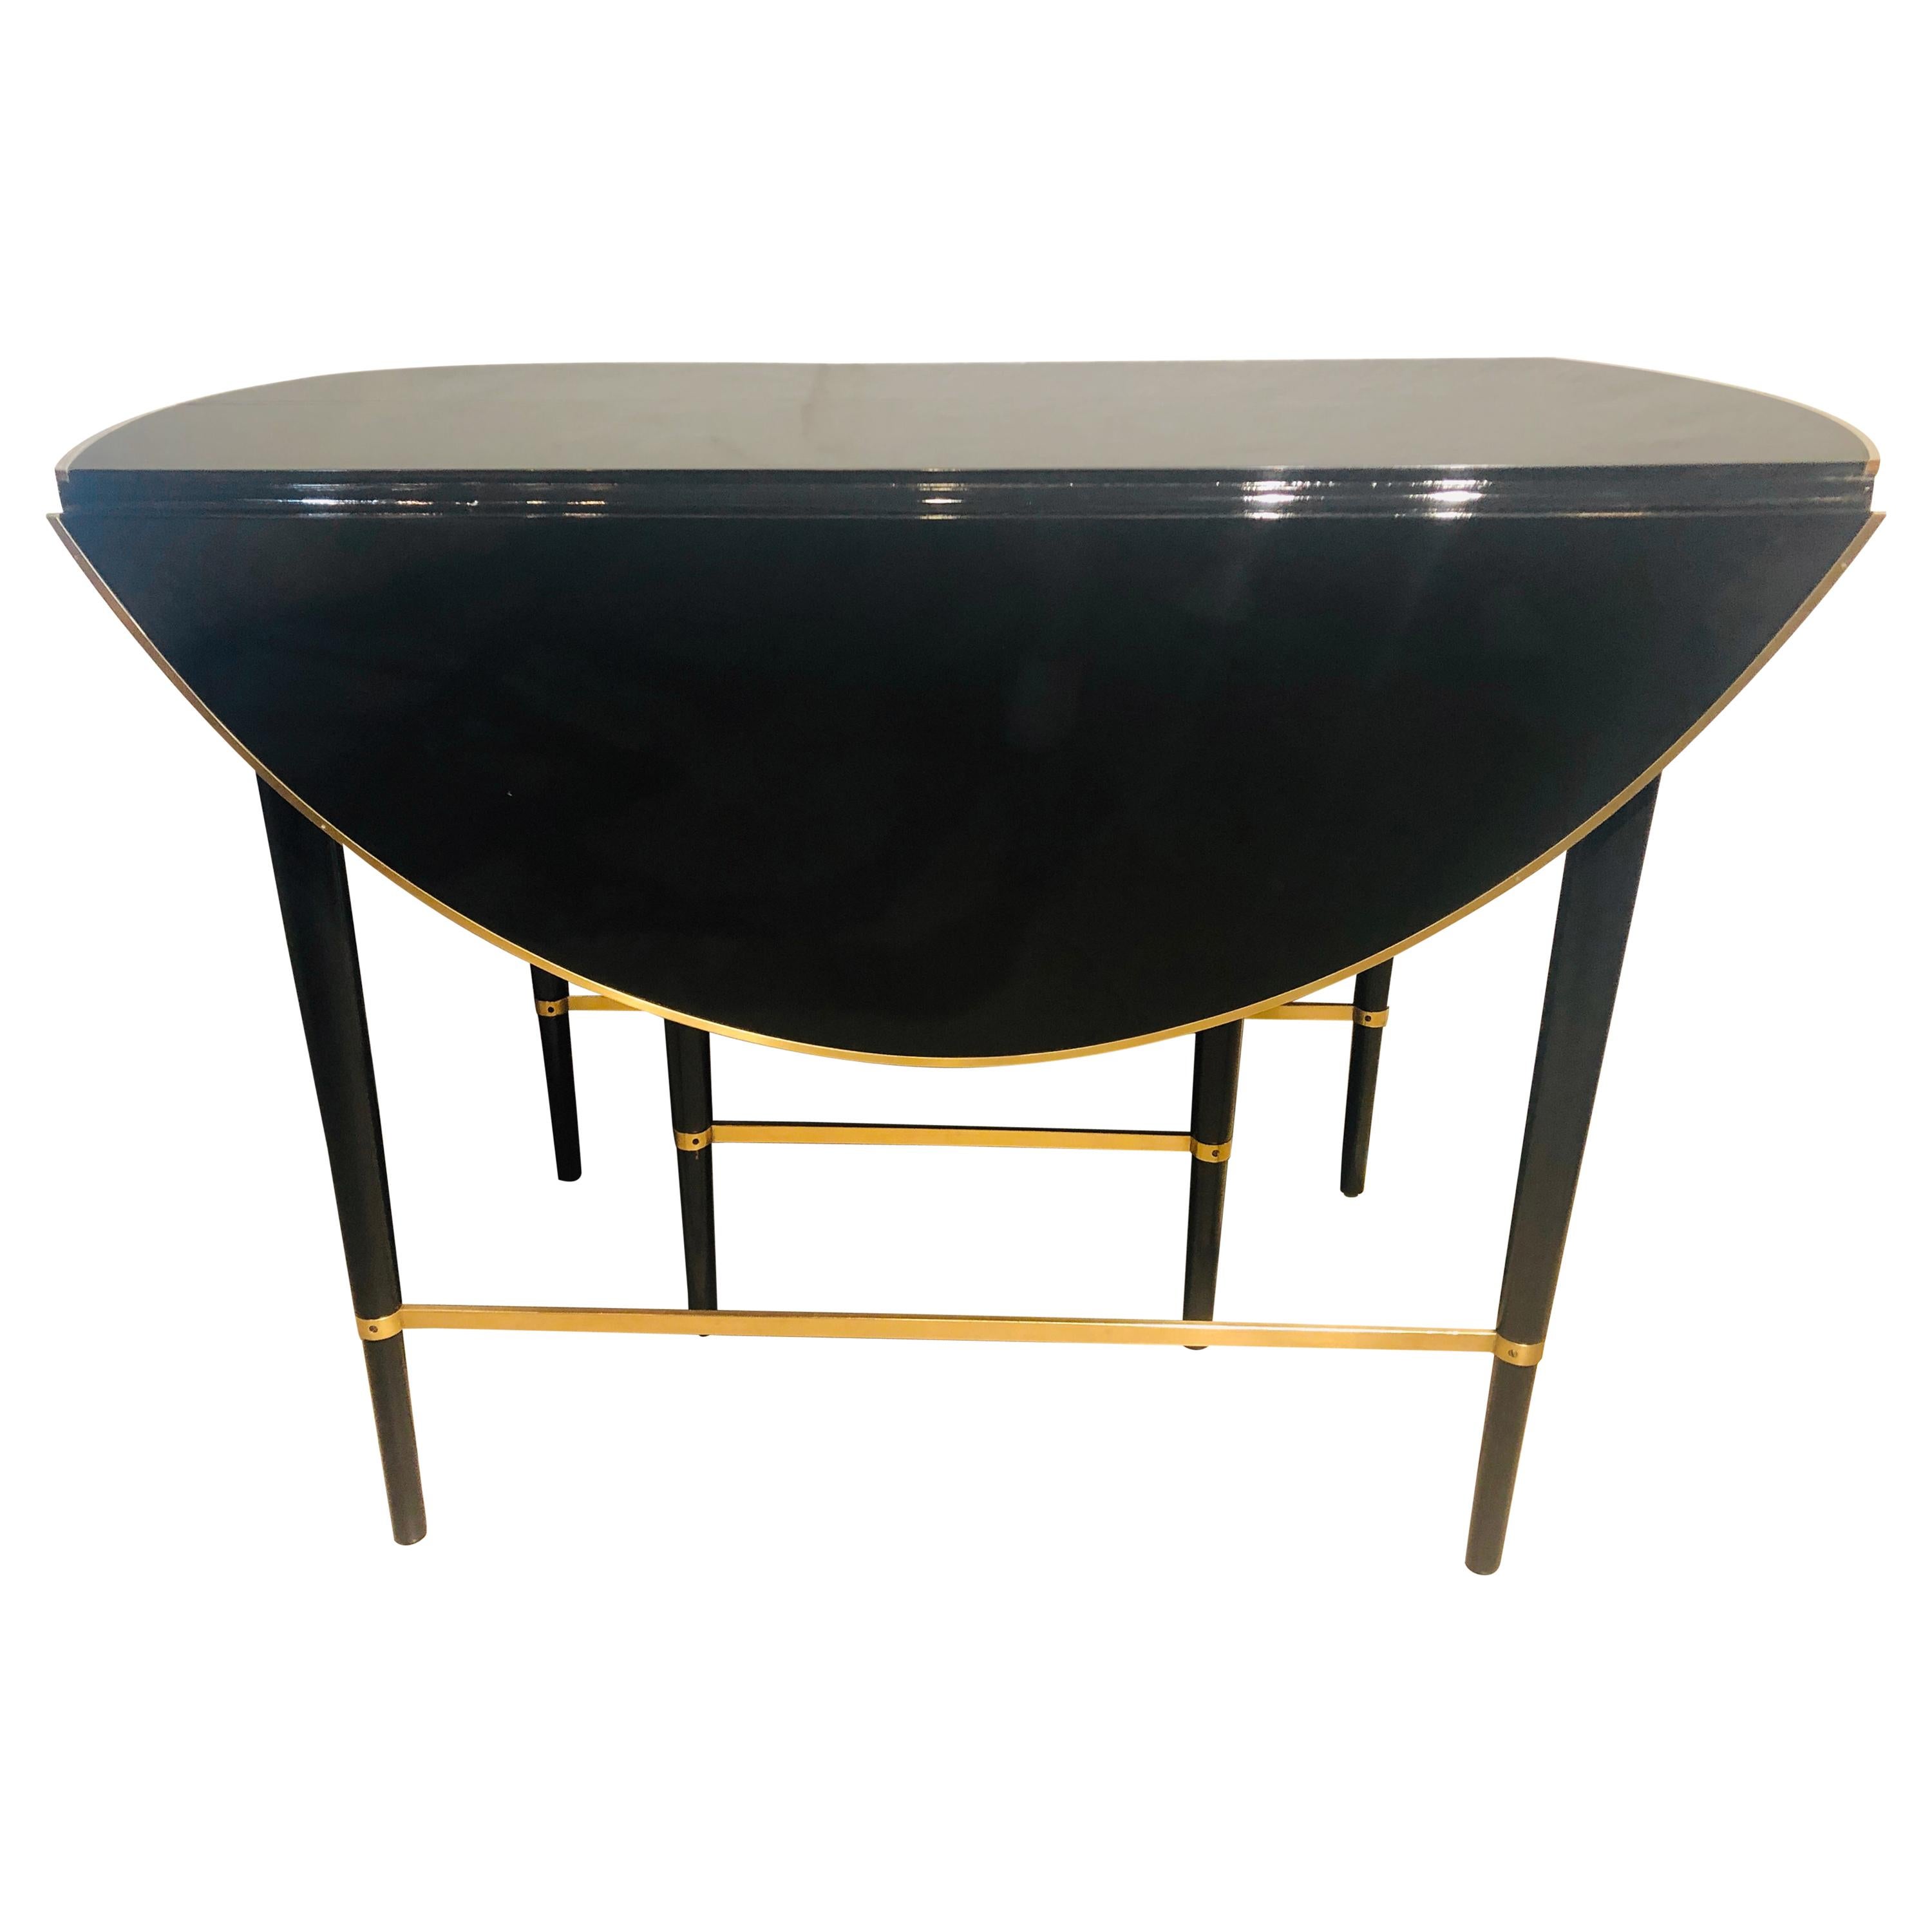 Mid-Century Modern Black Lacquered Paul McCobb Serving / Dining Table 5 Leaves